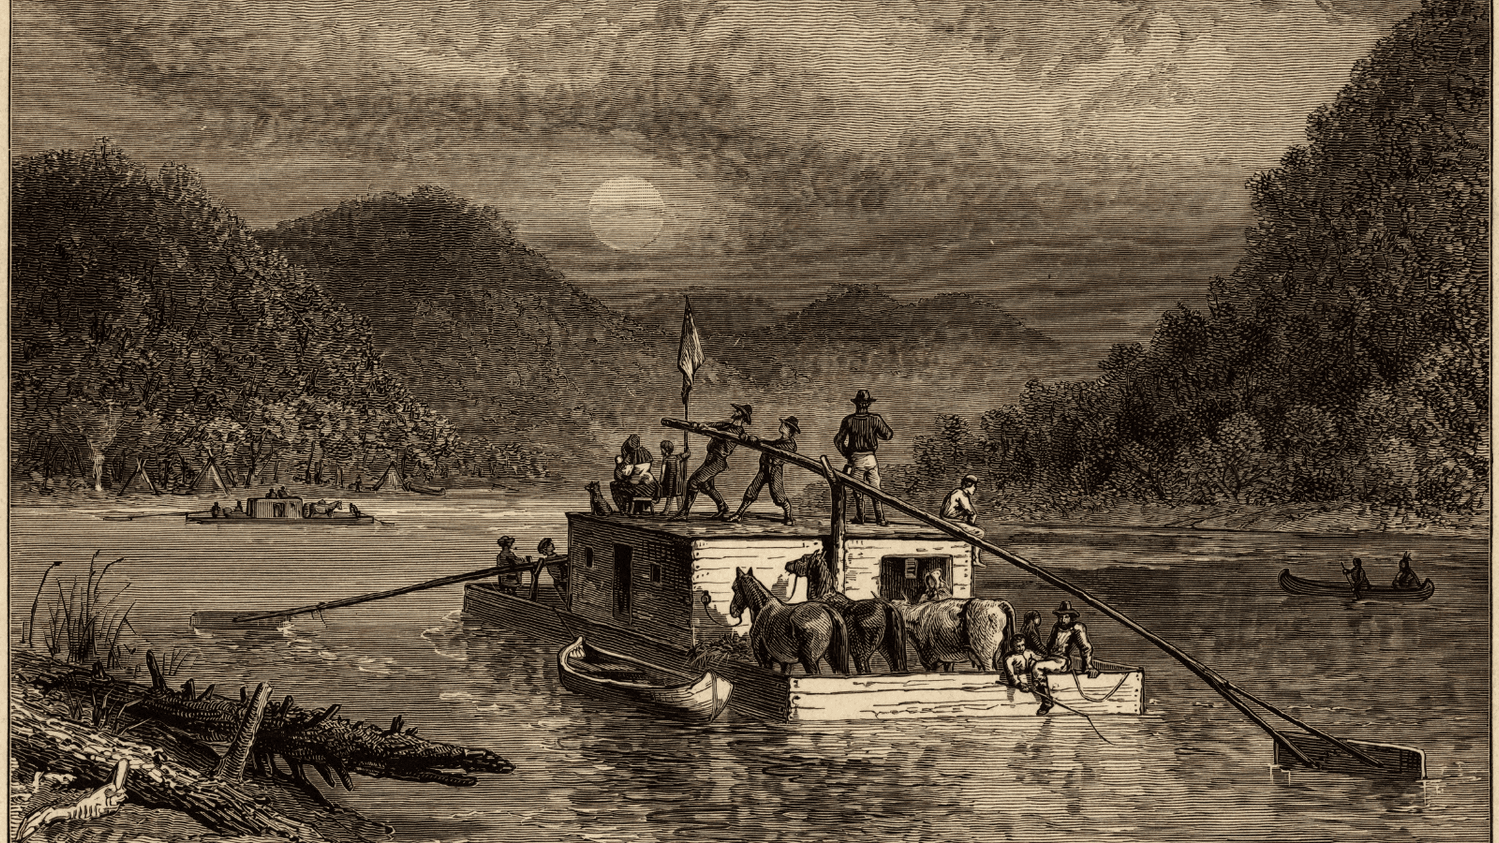 Pioneer Families Migrated to Kentucky by River and Foot Trails